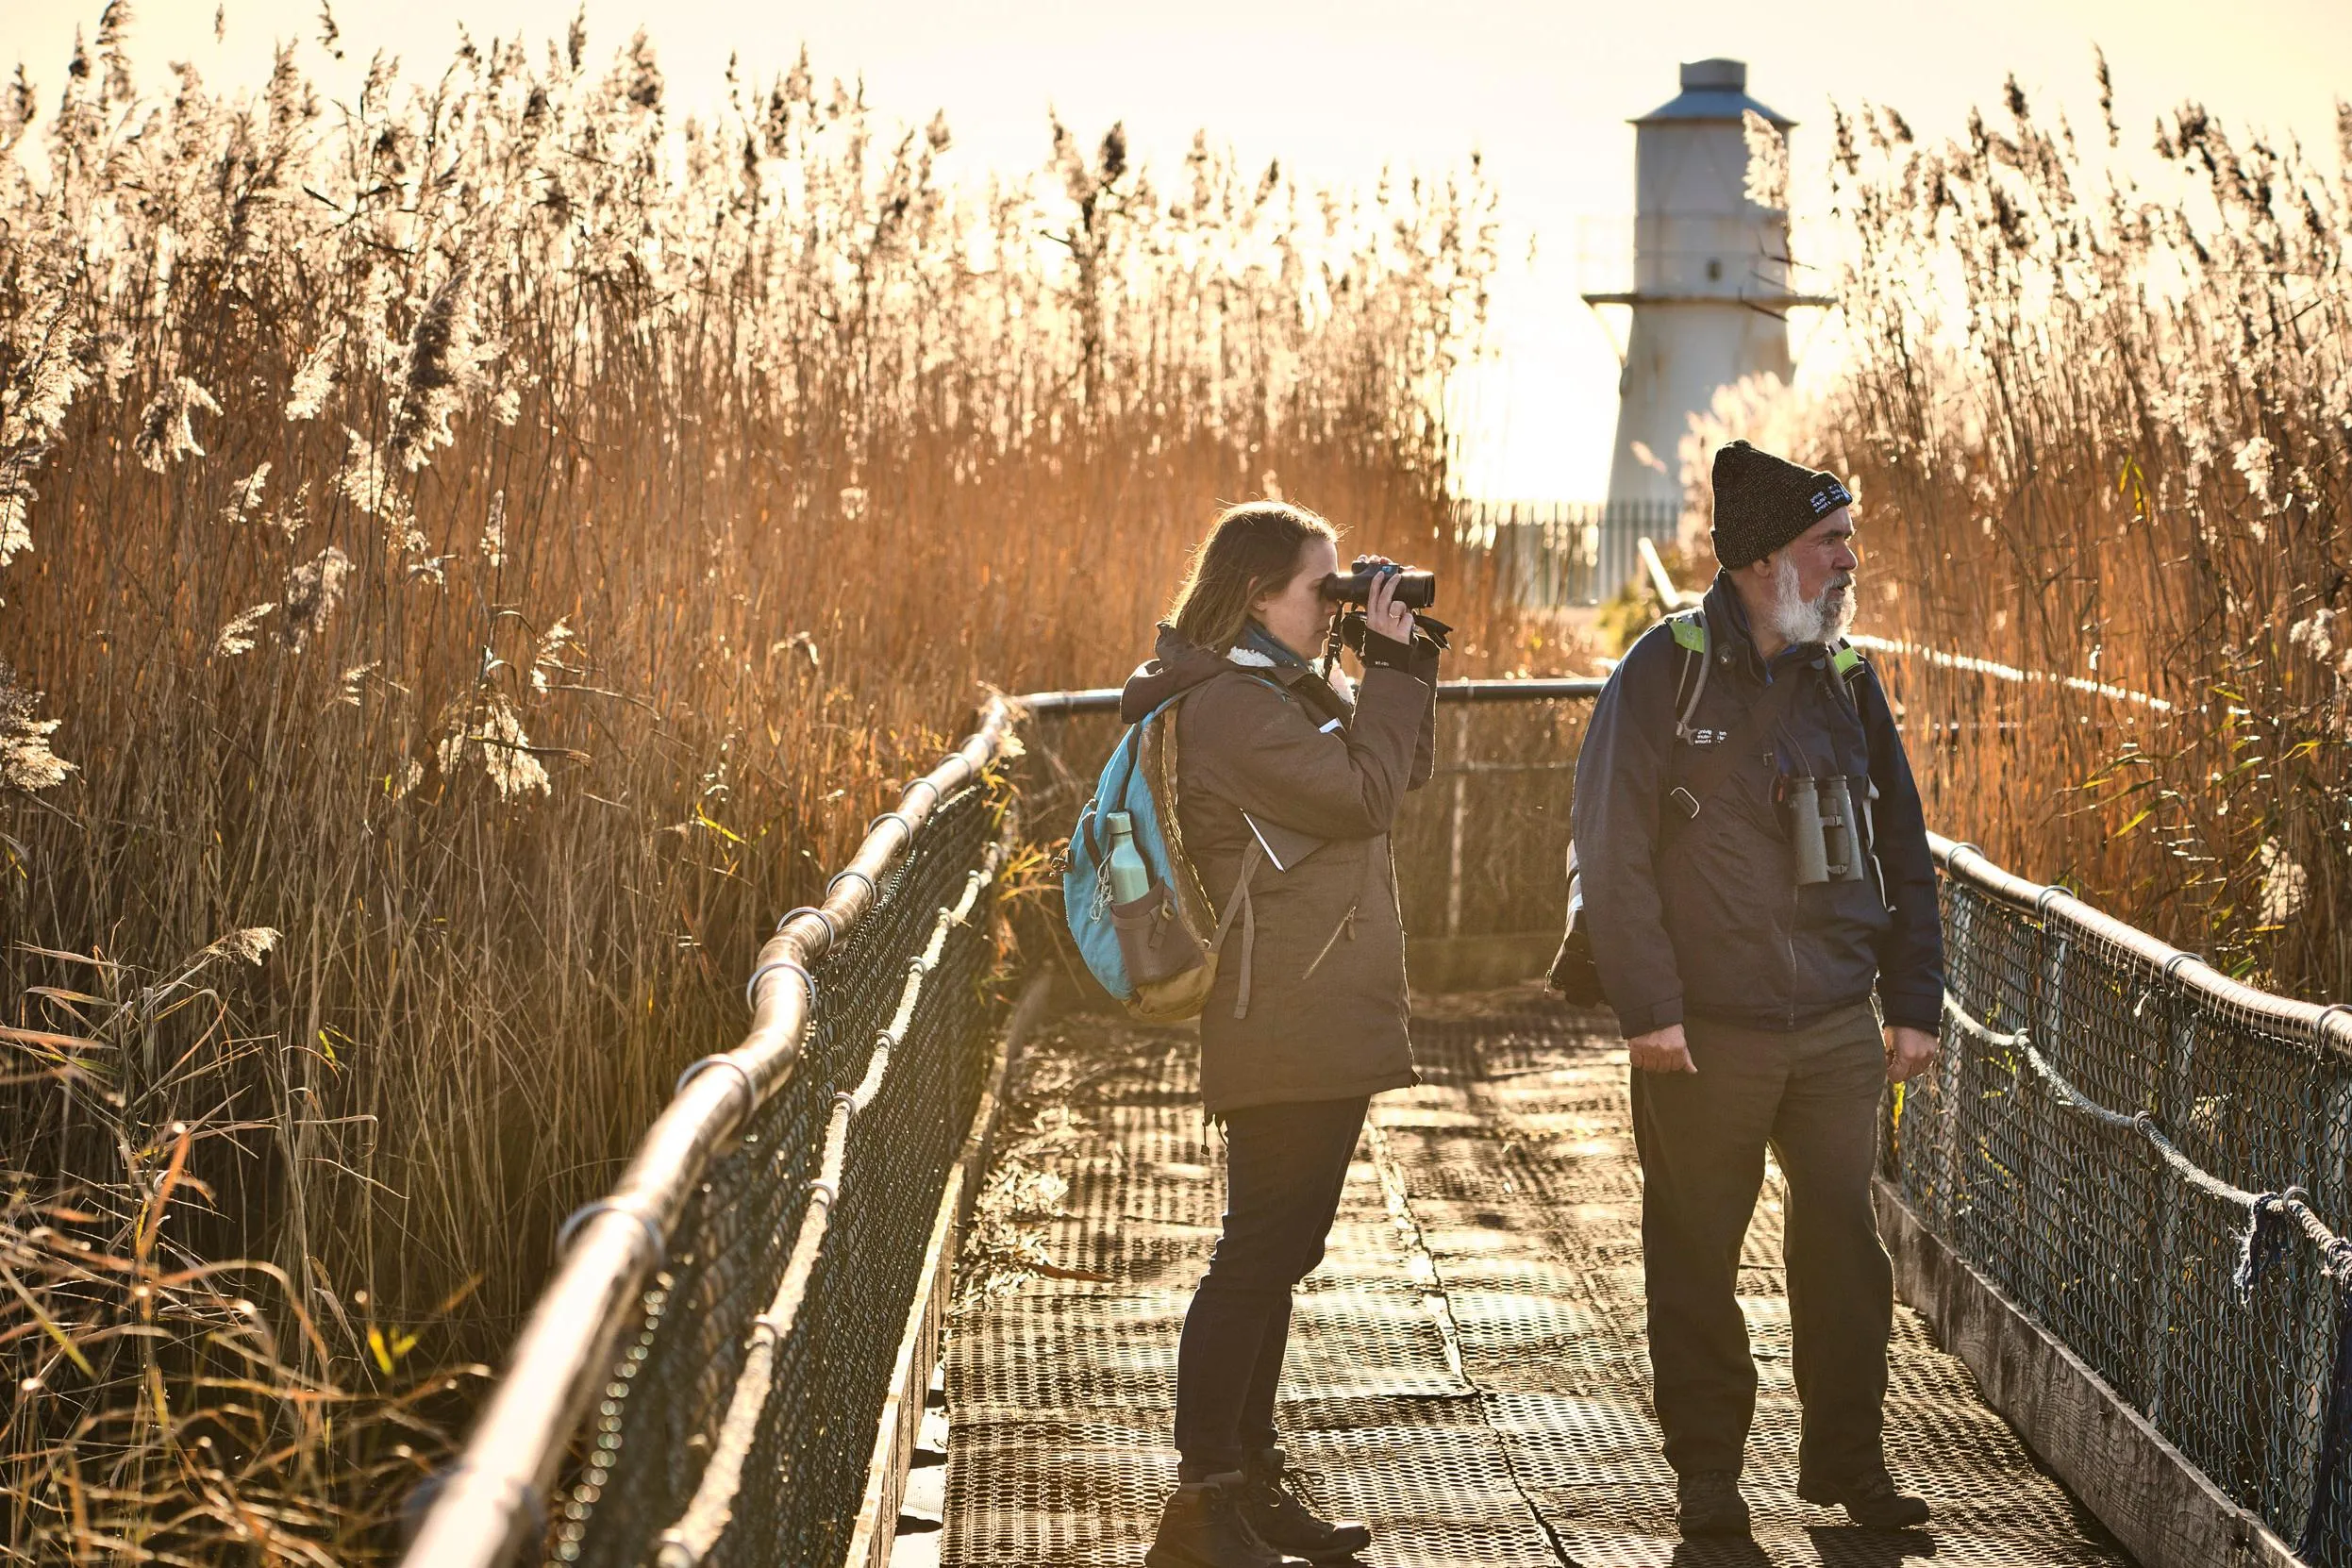 Two volunteers stood on a bridge surrounded by reeds and a lighthouse in the background.